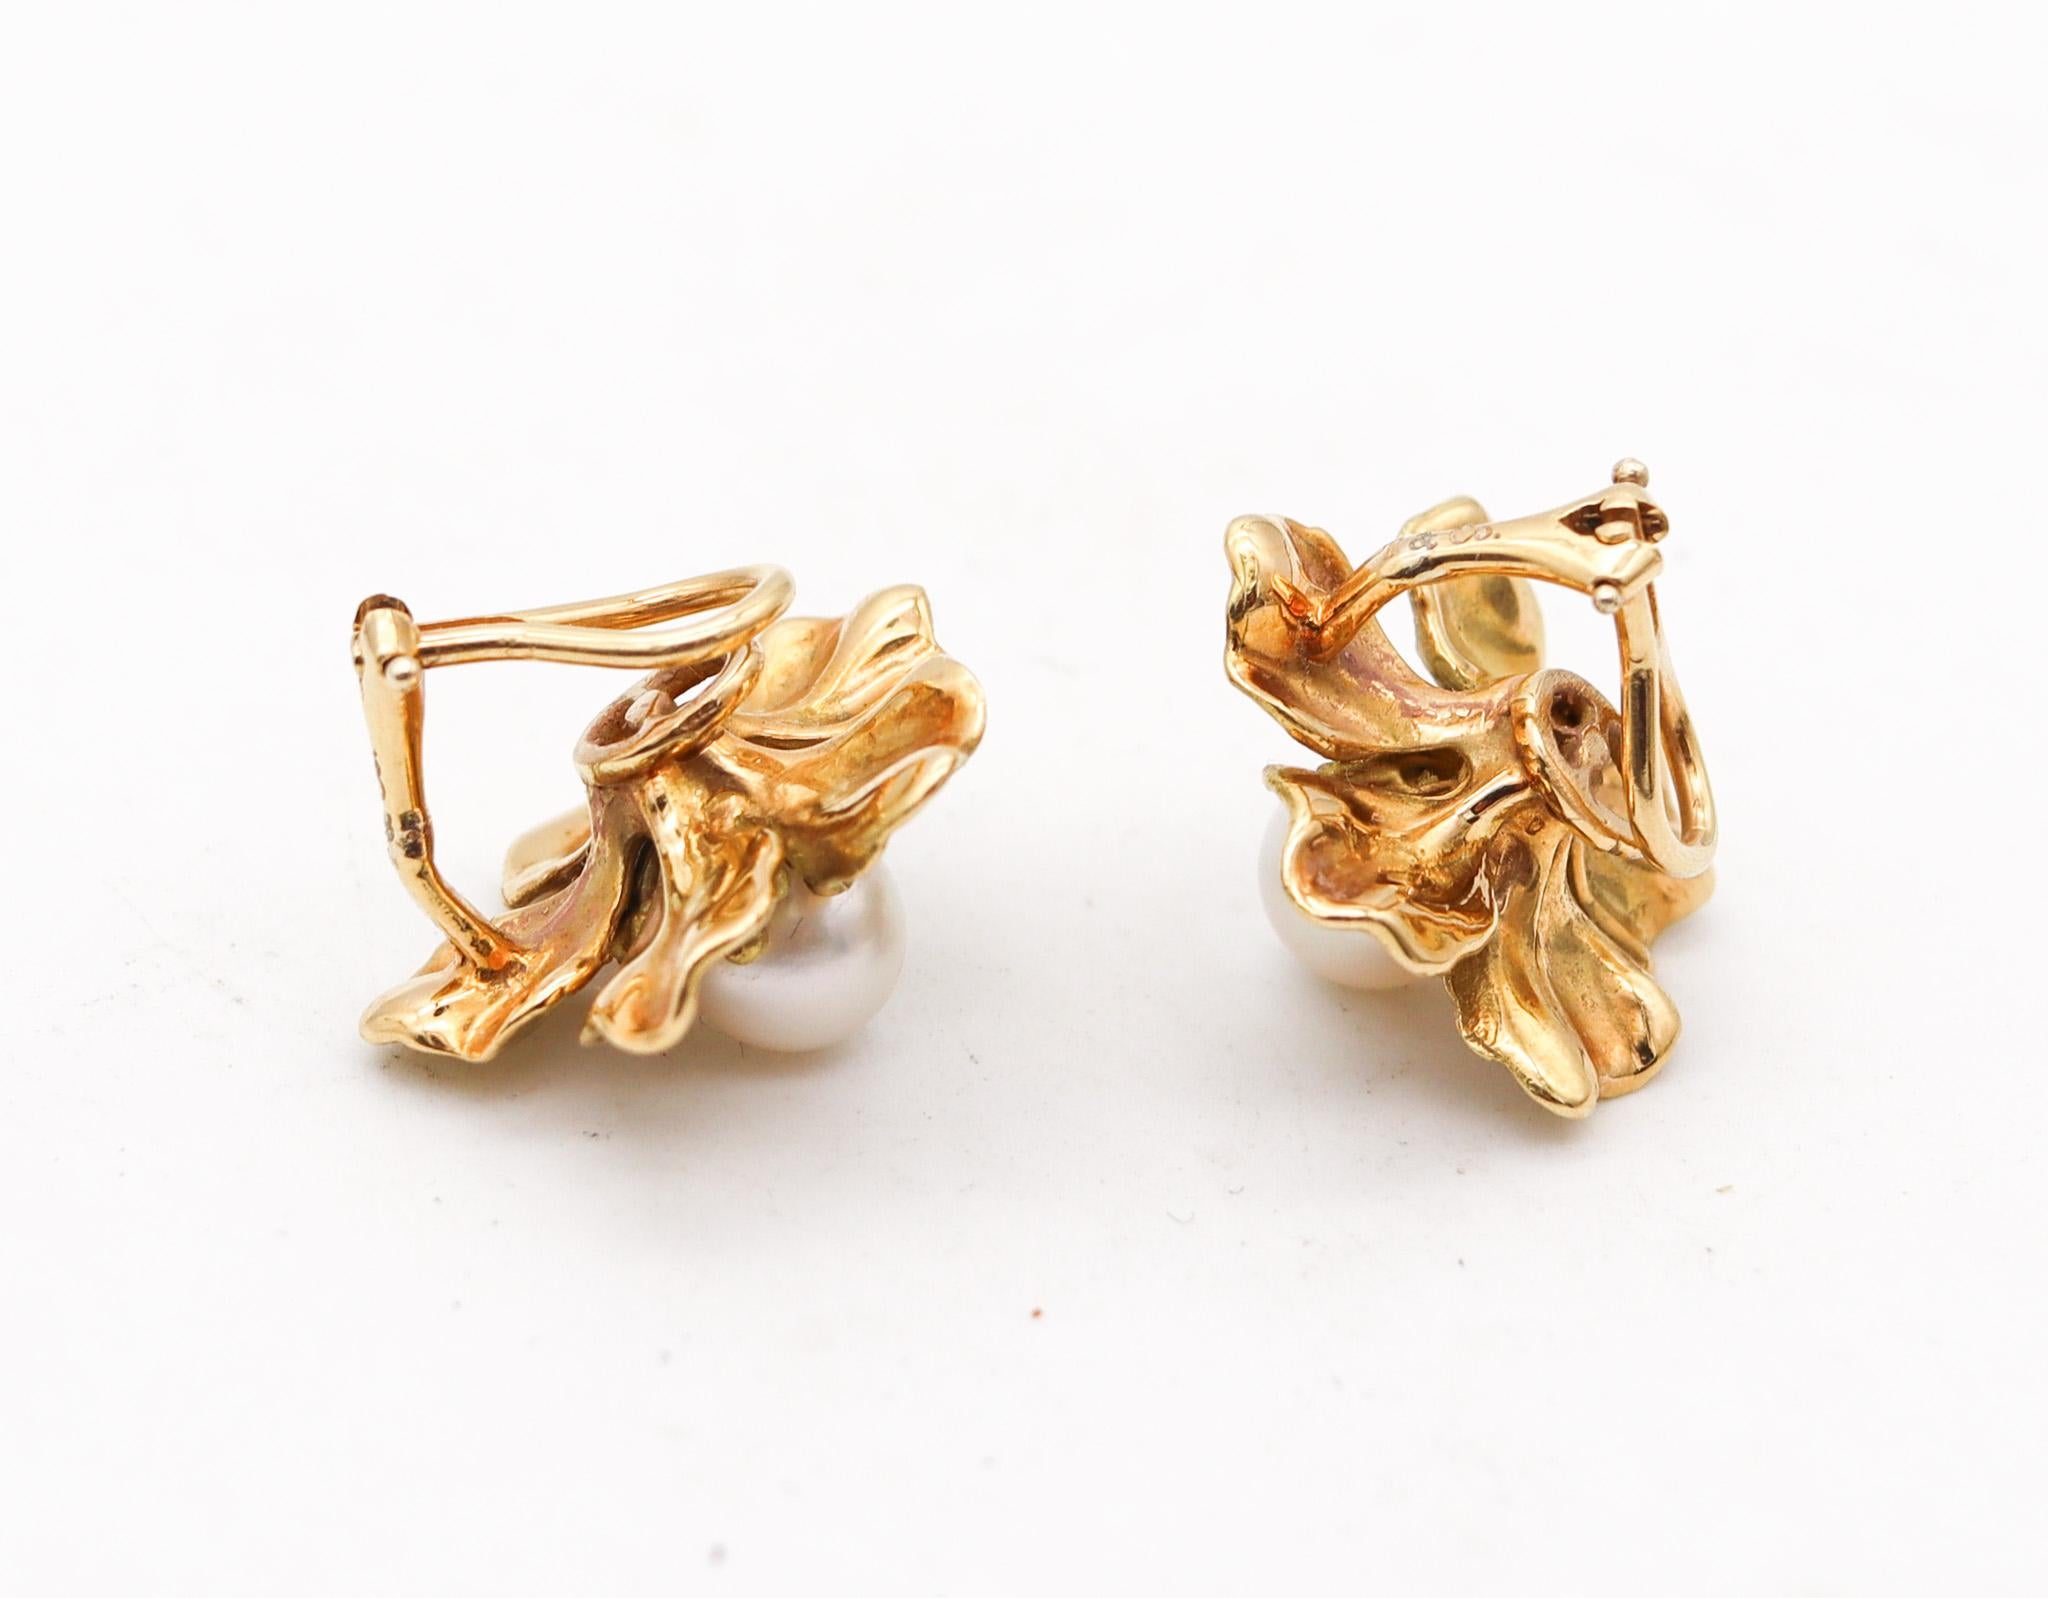 Modernist Tiffany & Co. Flowers Earrings In 18Kt Yellow Gold With Round White Pearls